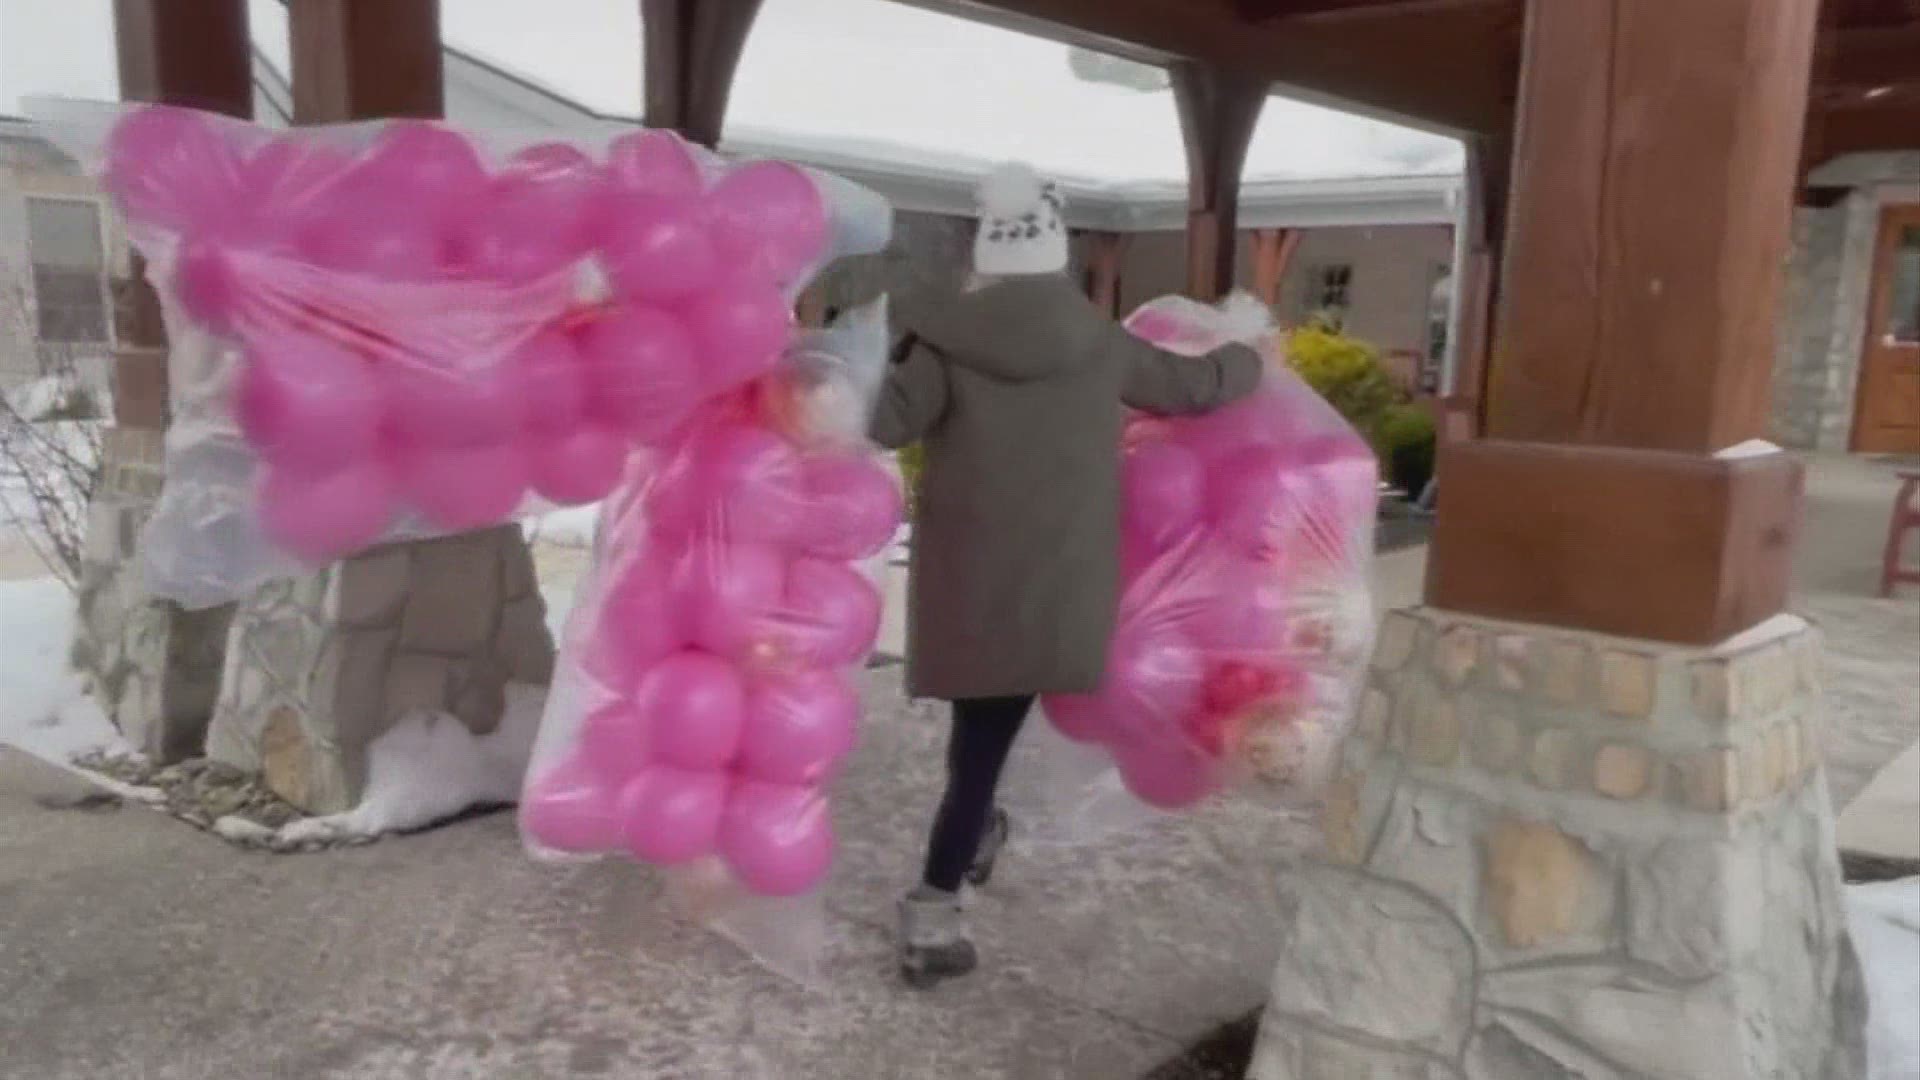 A local group delivered balloon bouquets to help spread some love this holiday weekend.